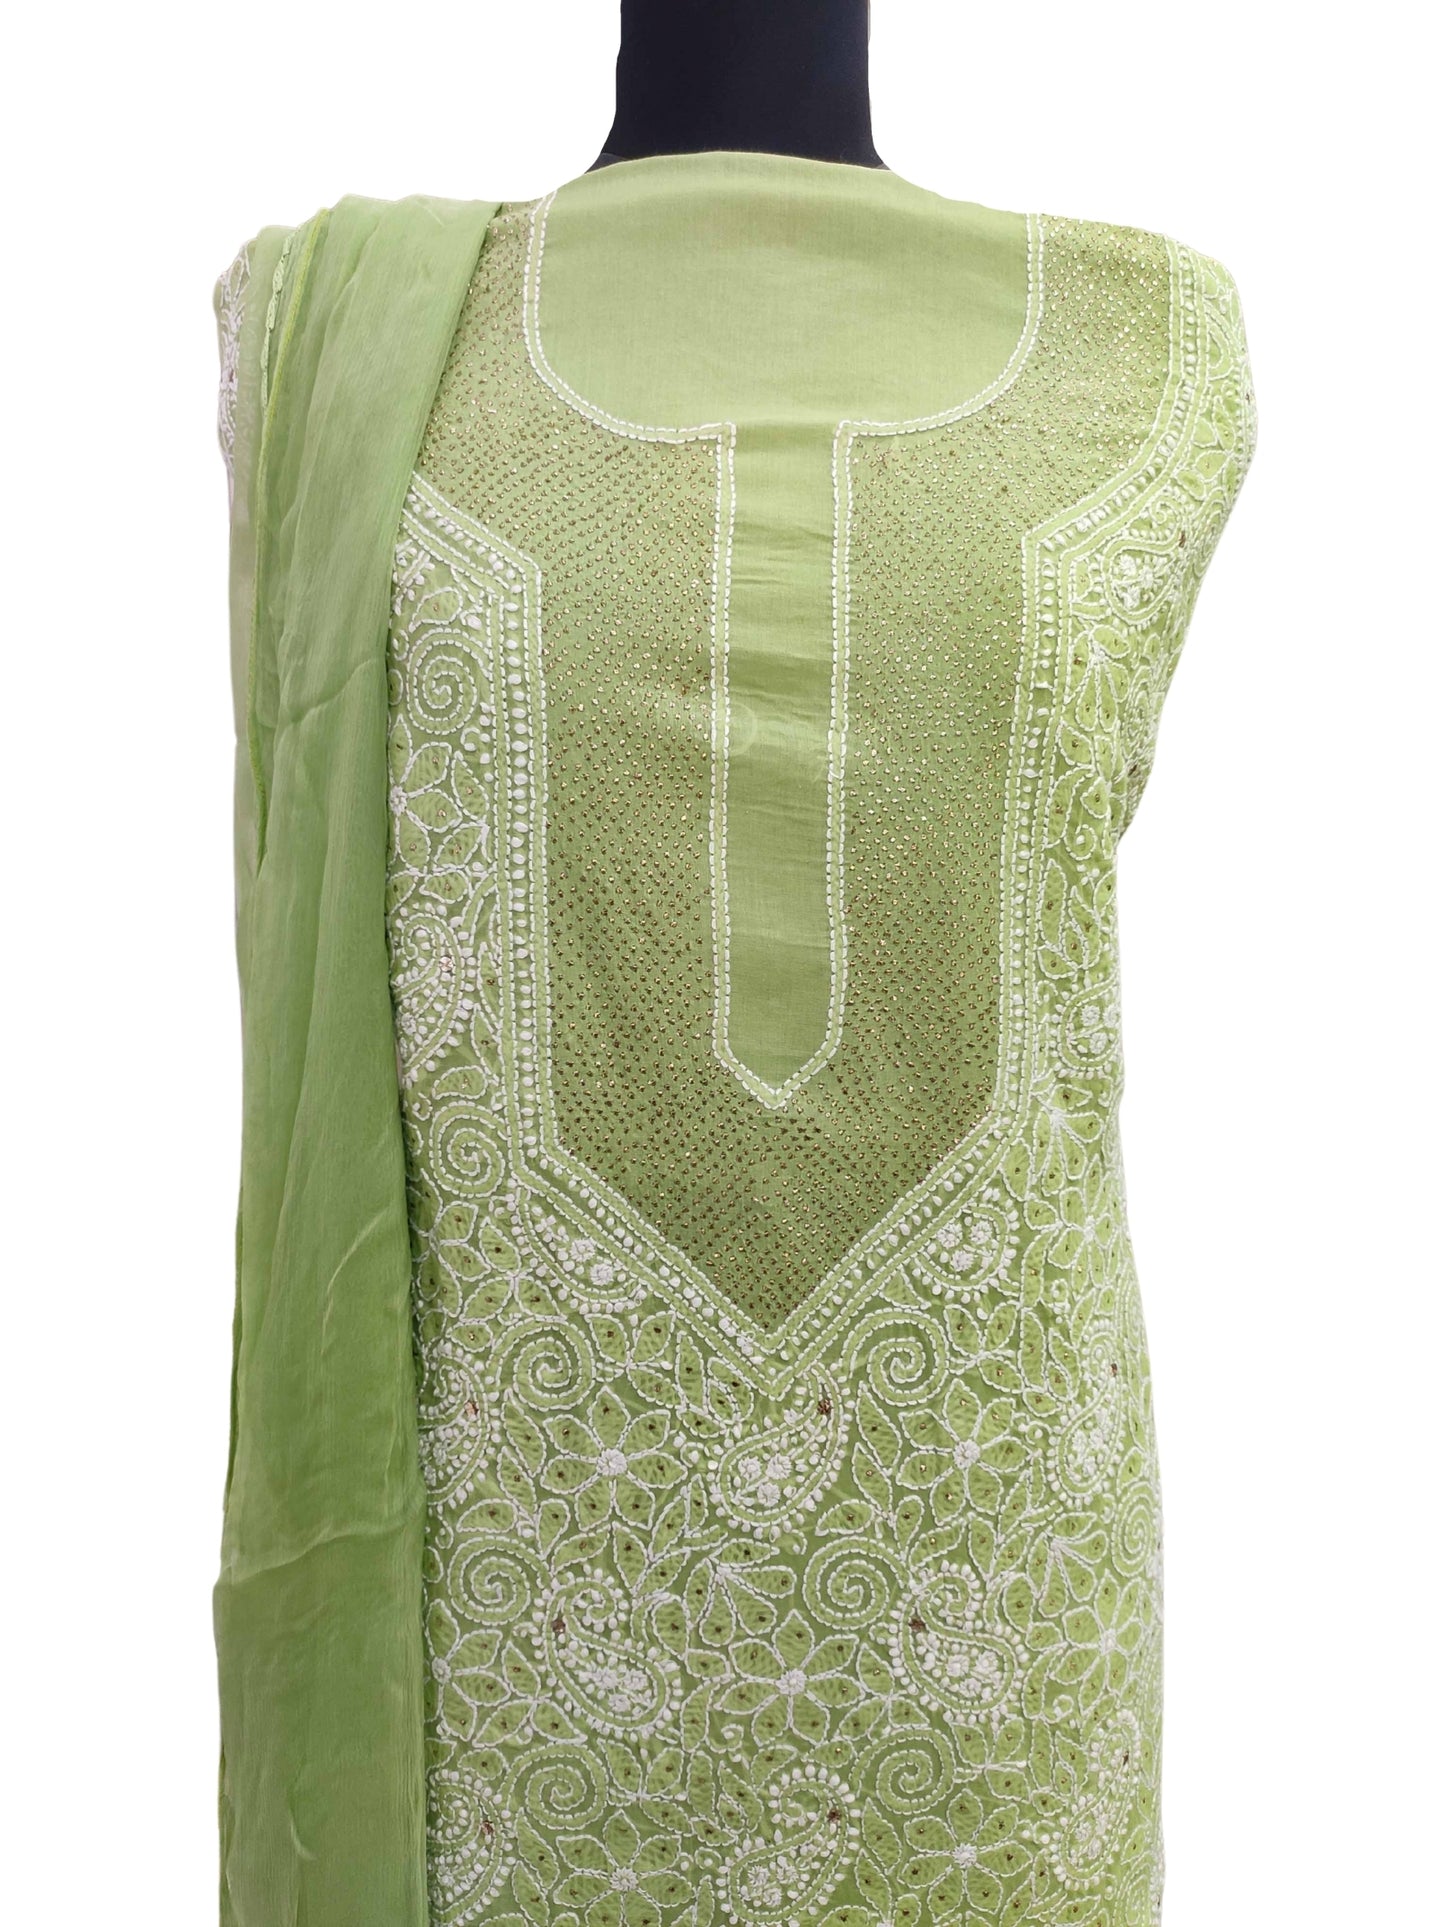 Shyamal Chikan Hand Embroidered Green Cotton Lucknowi Chikankari Unstitched Suit Piece With Mukaish Work - S11691 - Shyamal Chikan